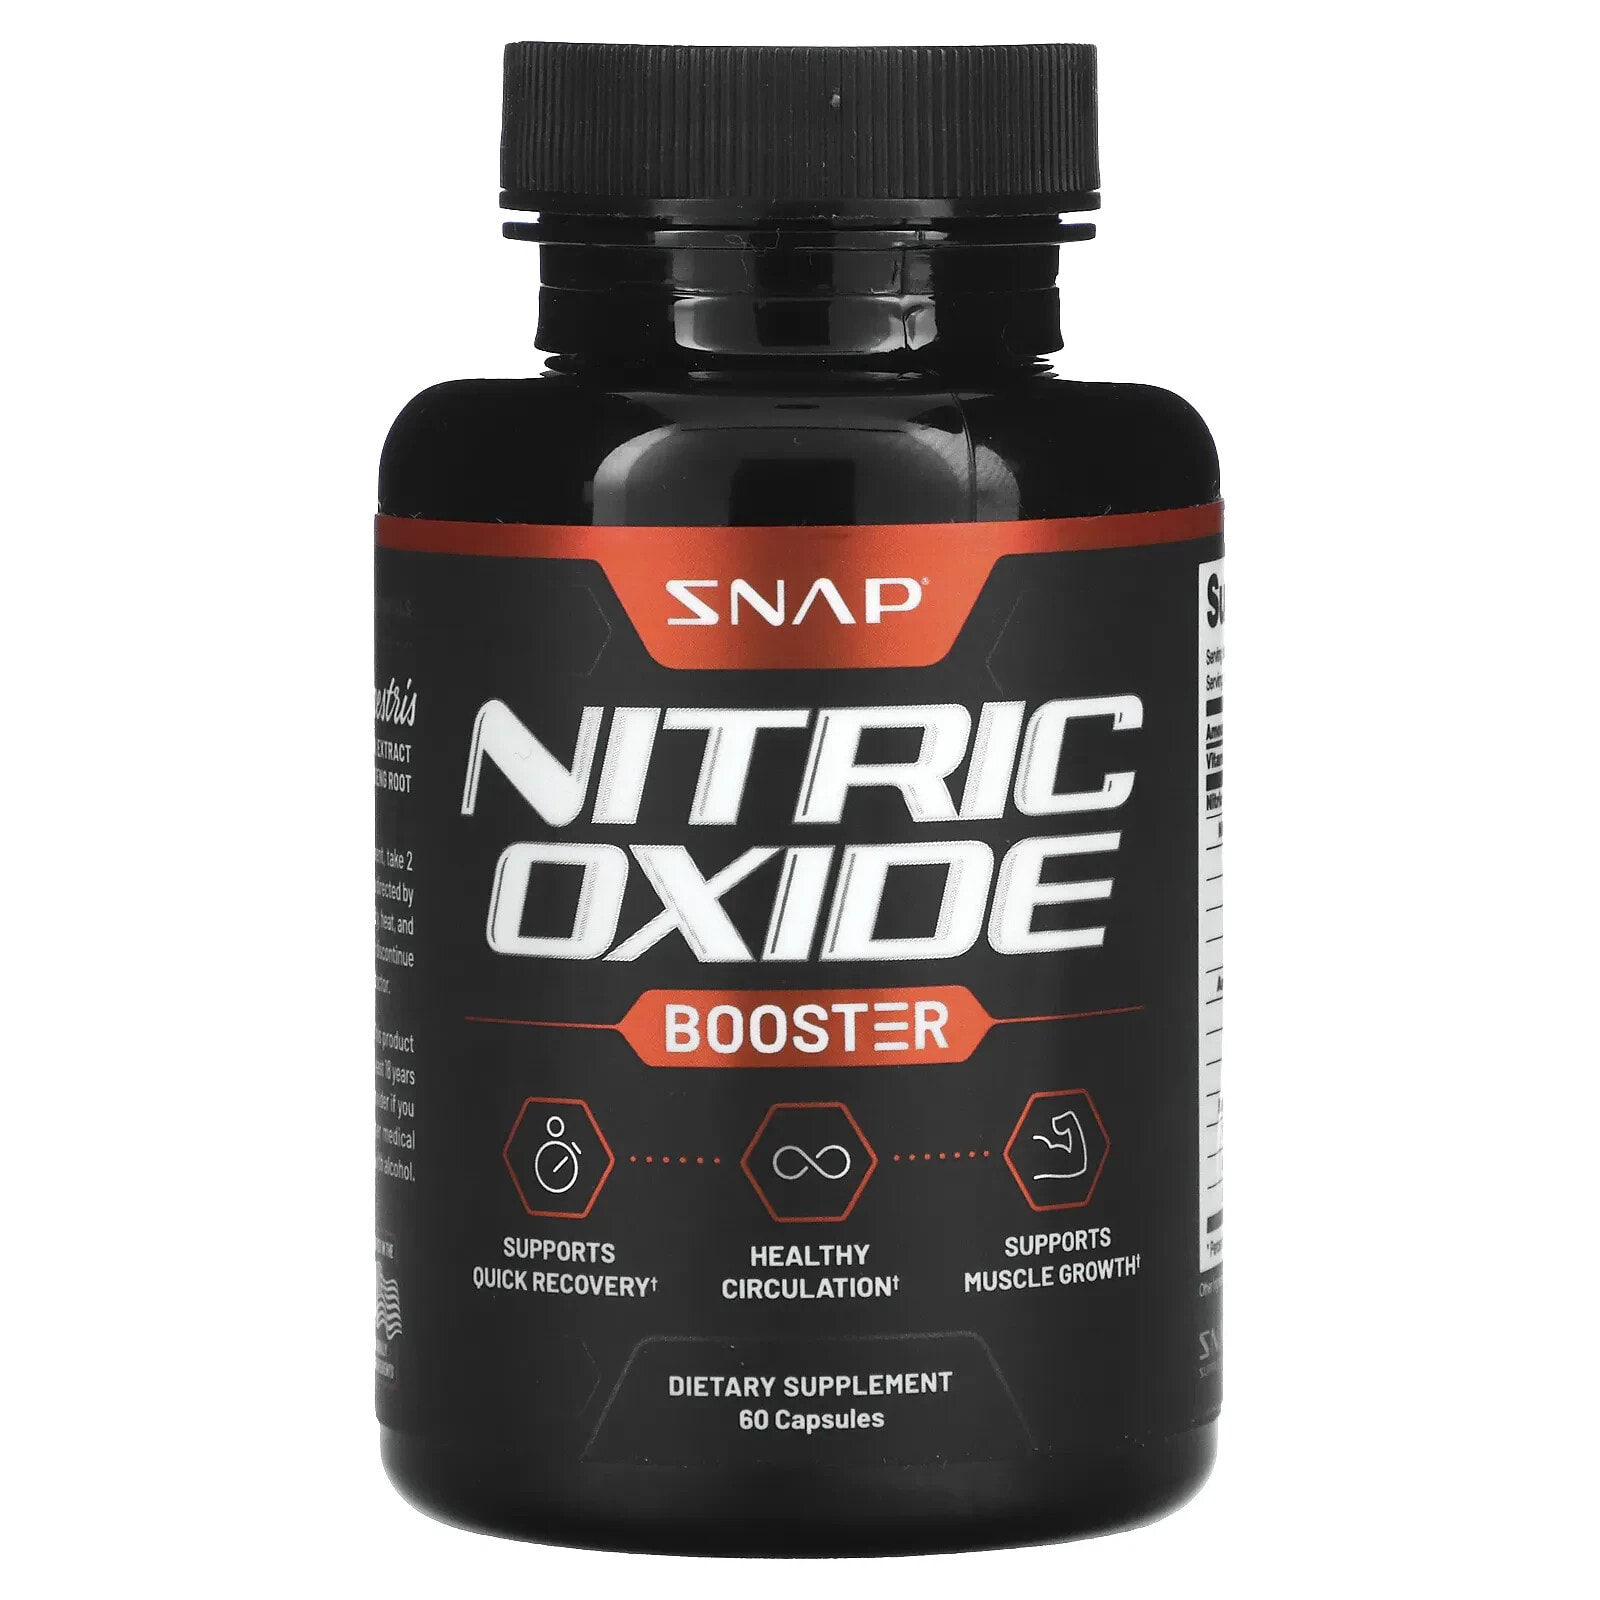 Nitric Oxide Booster, 60 Capsules